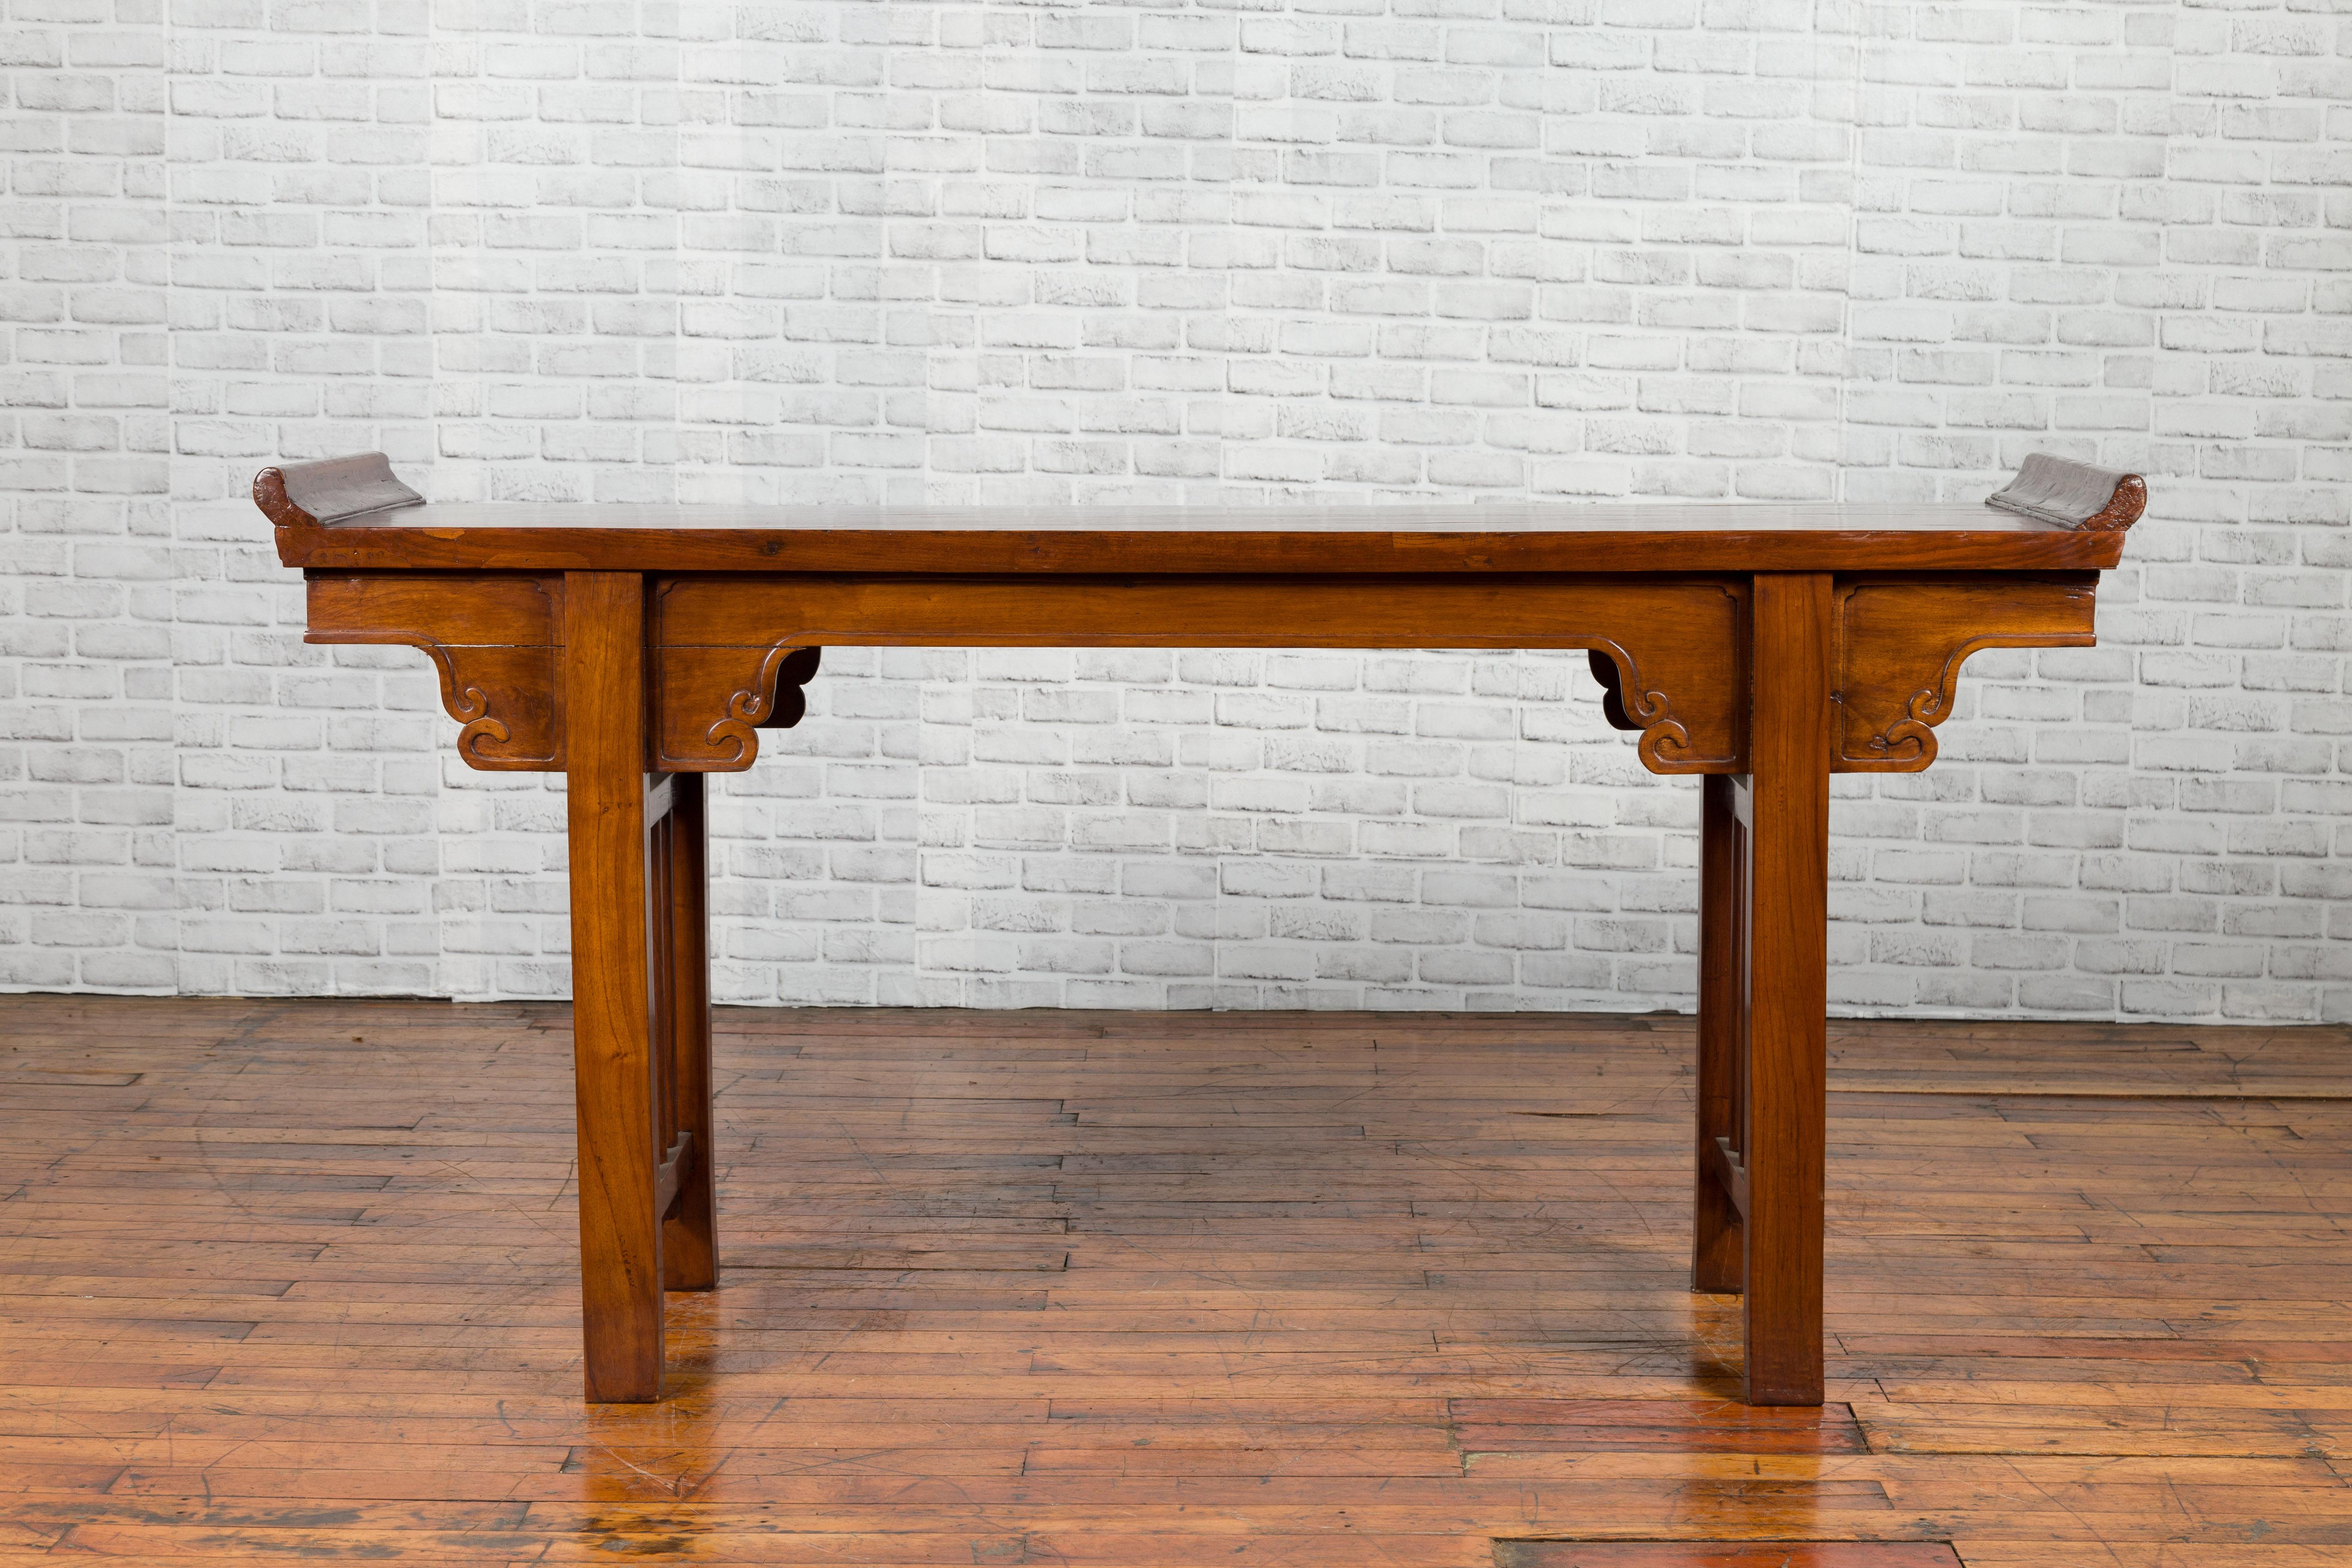 A Chinese Qing Dynasty period elmwood altar console table from the 19th century, with carved spandrels and everted flanges. Created in China during the 19th century, this console table features a single plank rectangular top flanked with everted